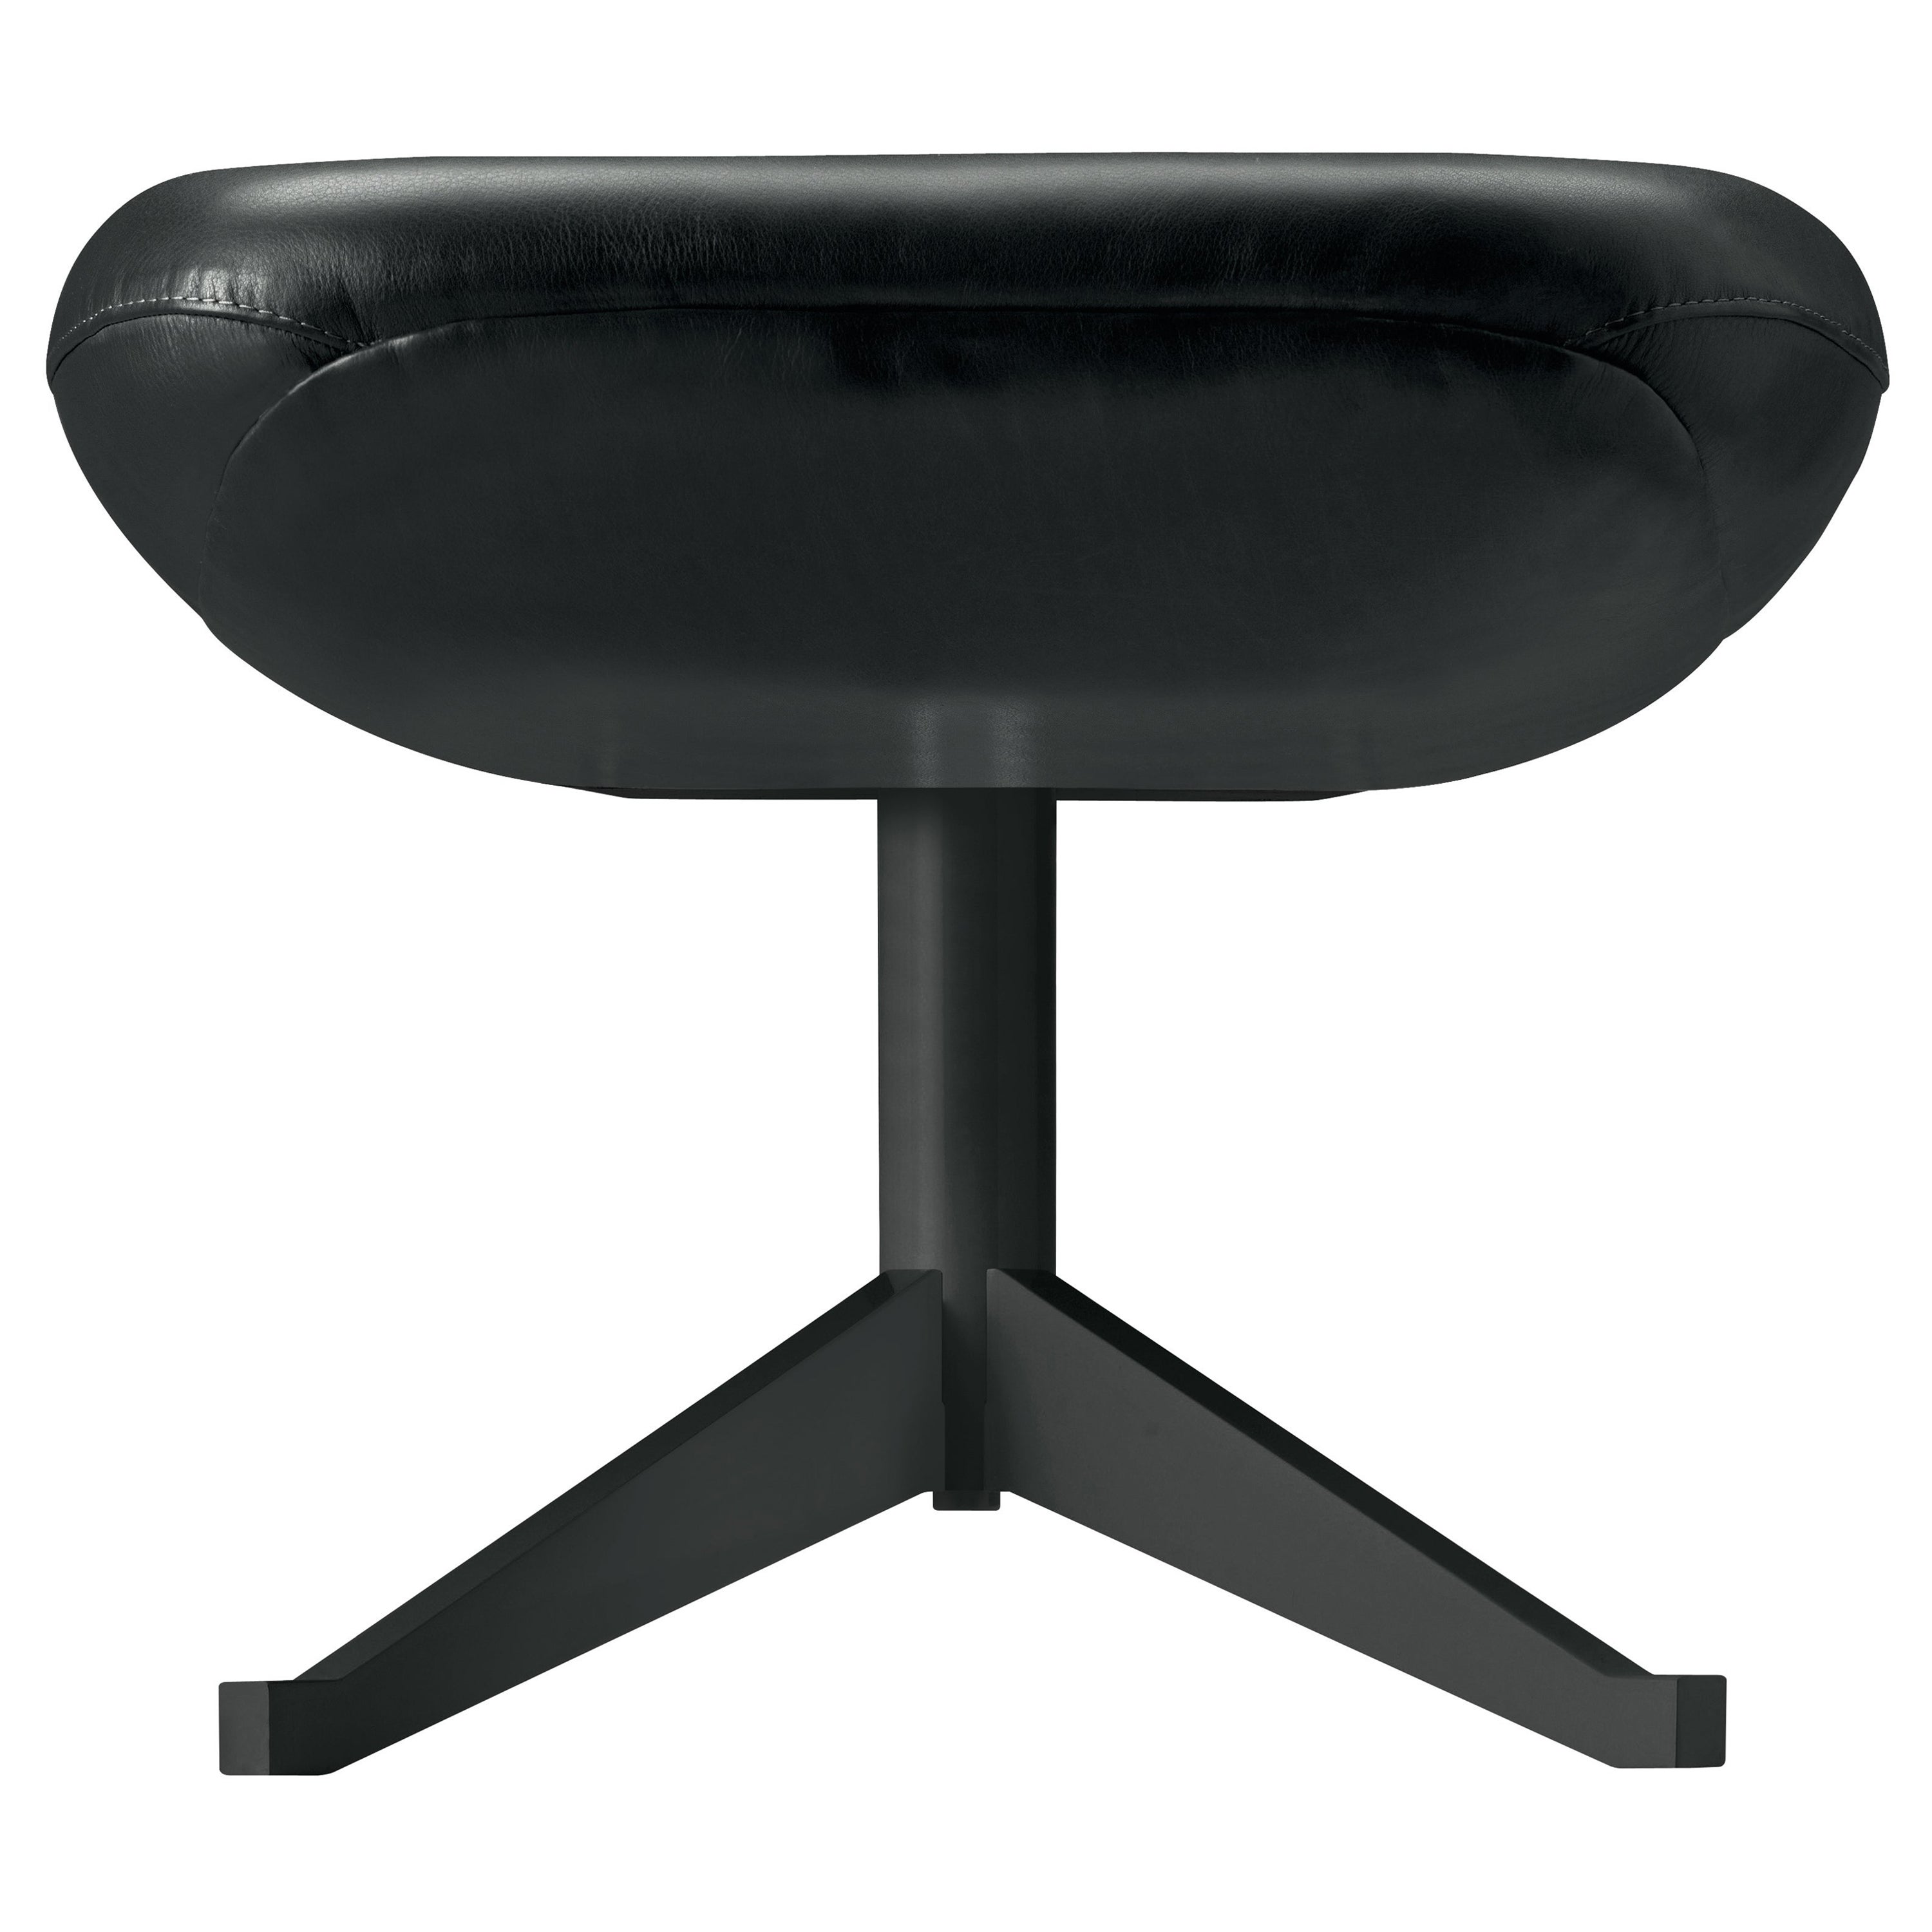 Alias 091 Manzù Pouf in Black Leather Seat with Black Lacquered Aluminum Frame